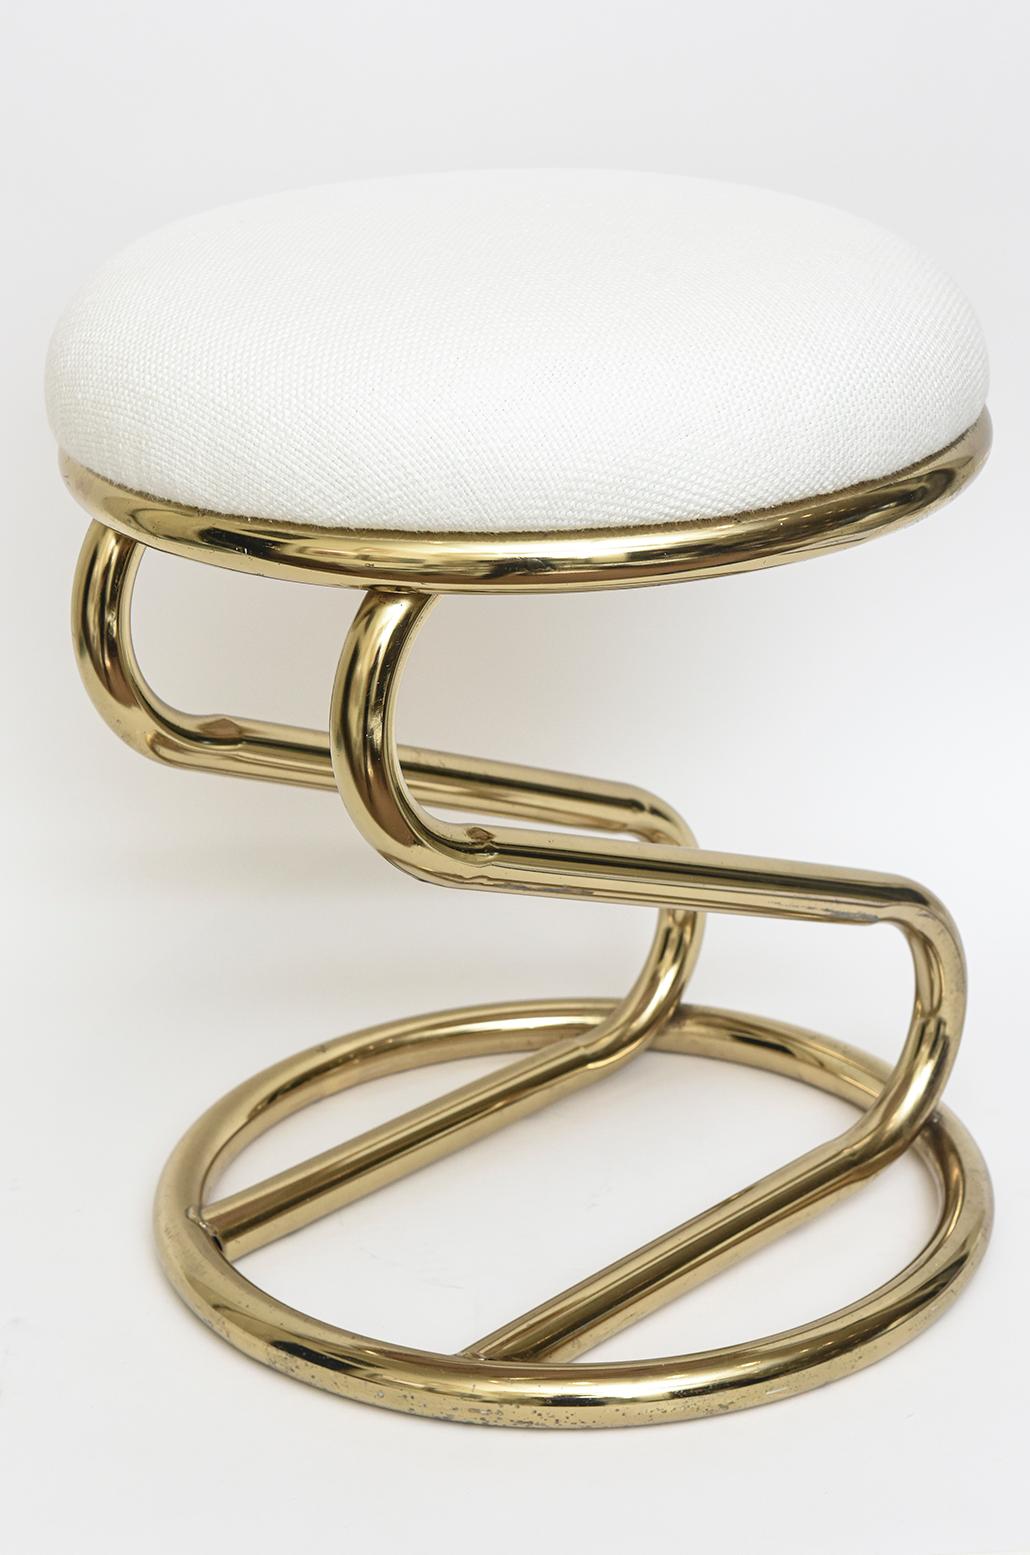 This vintage zig zag stool is brass toned in color over steel. It is not brass. It has not been re-plated in brass either. The seat has been re-upholstered in a white textural cotton. Could be used as a footstool or a small stool in a bathroom or